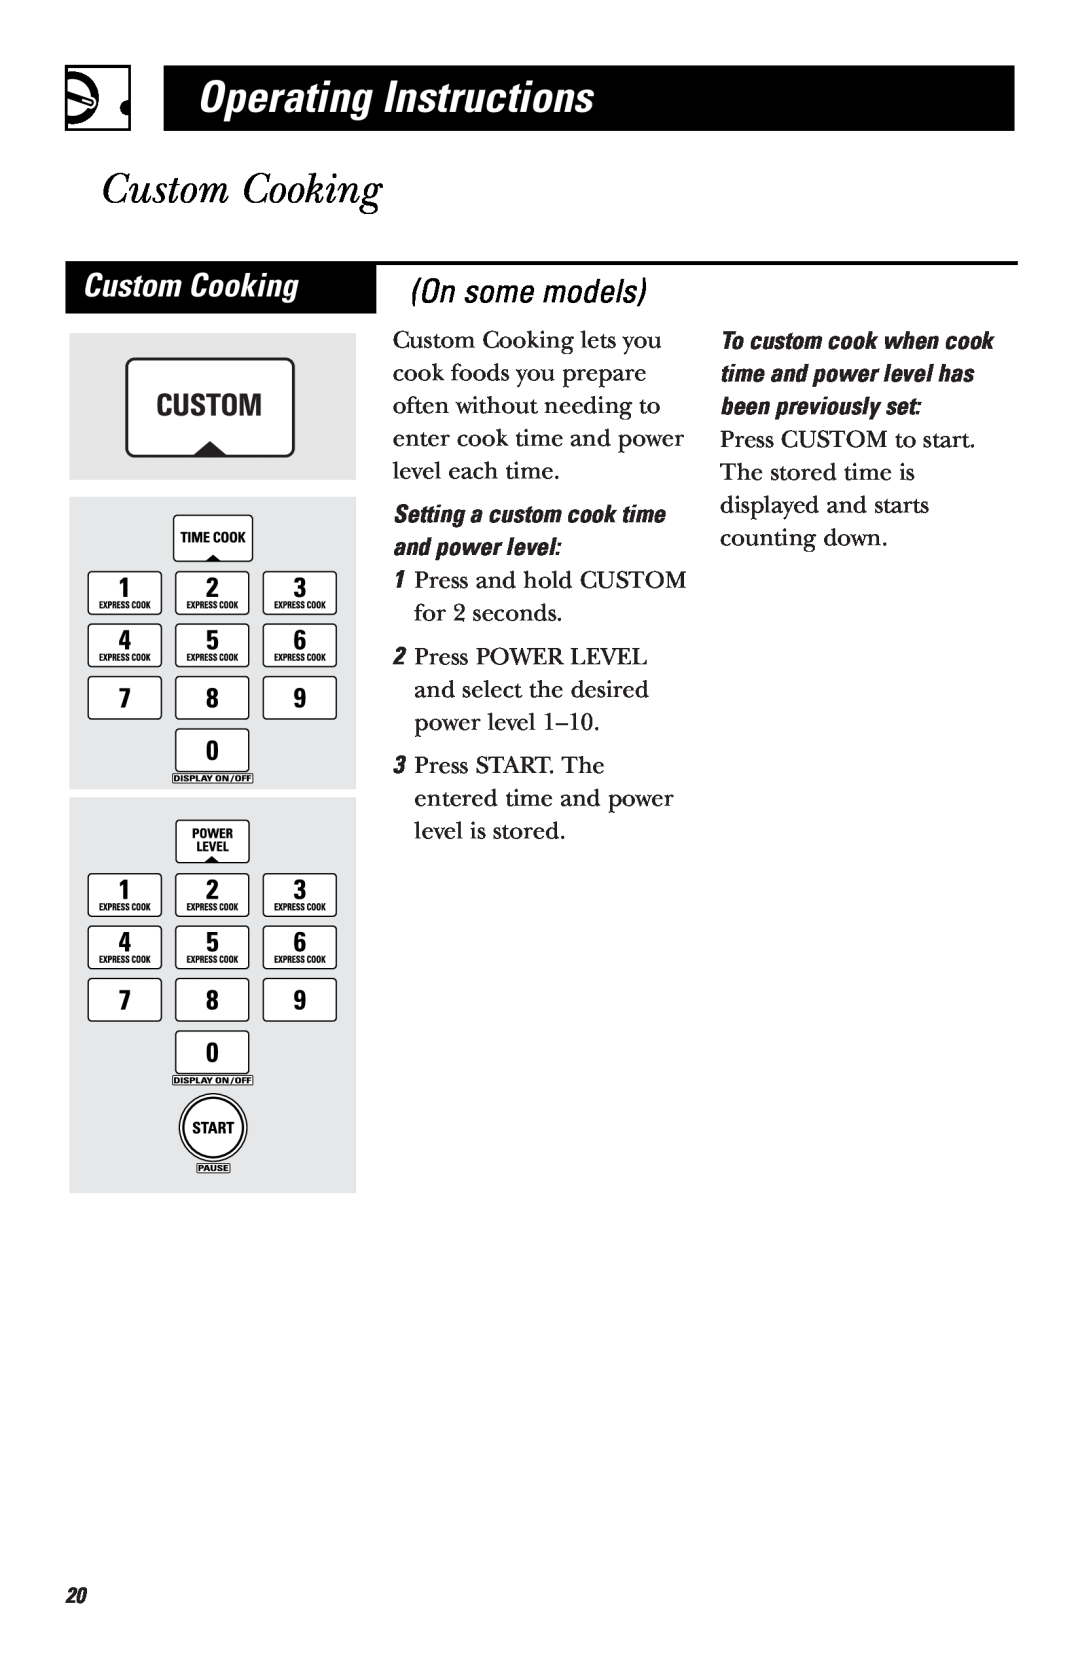 GE LVM1750, EVM1750 Custom Cooking On some models, Operating Instructions, Setting a custom cook time and power level 